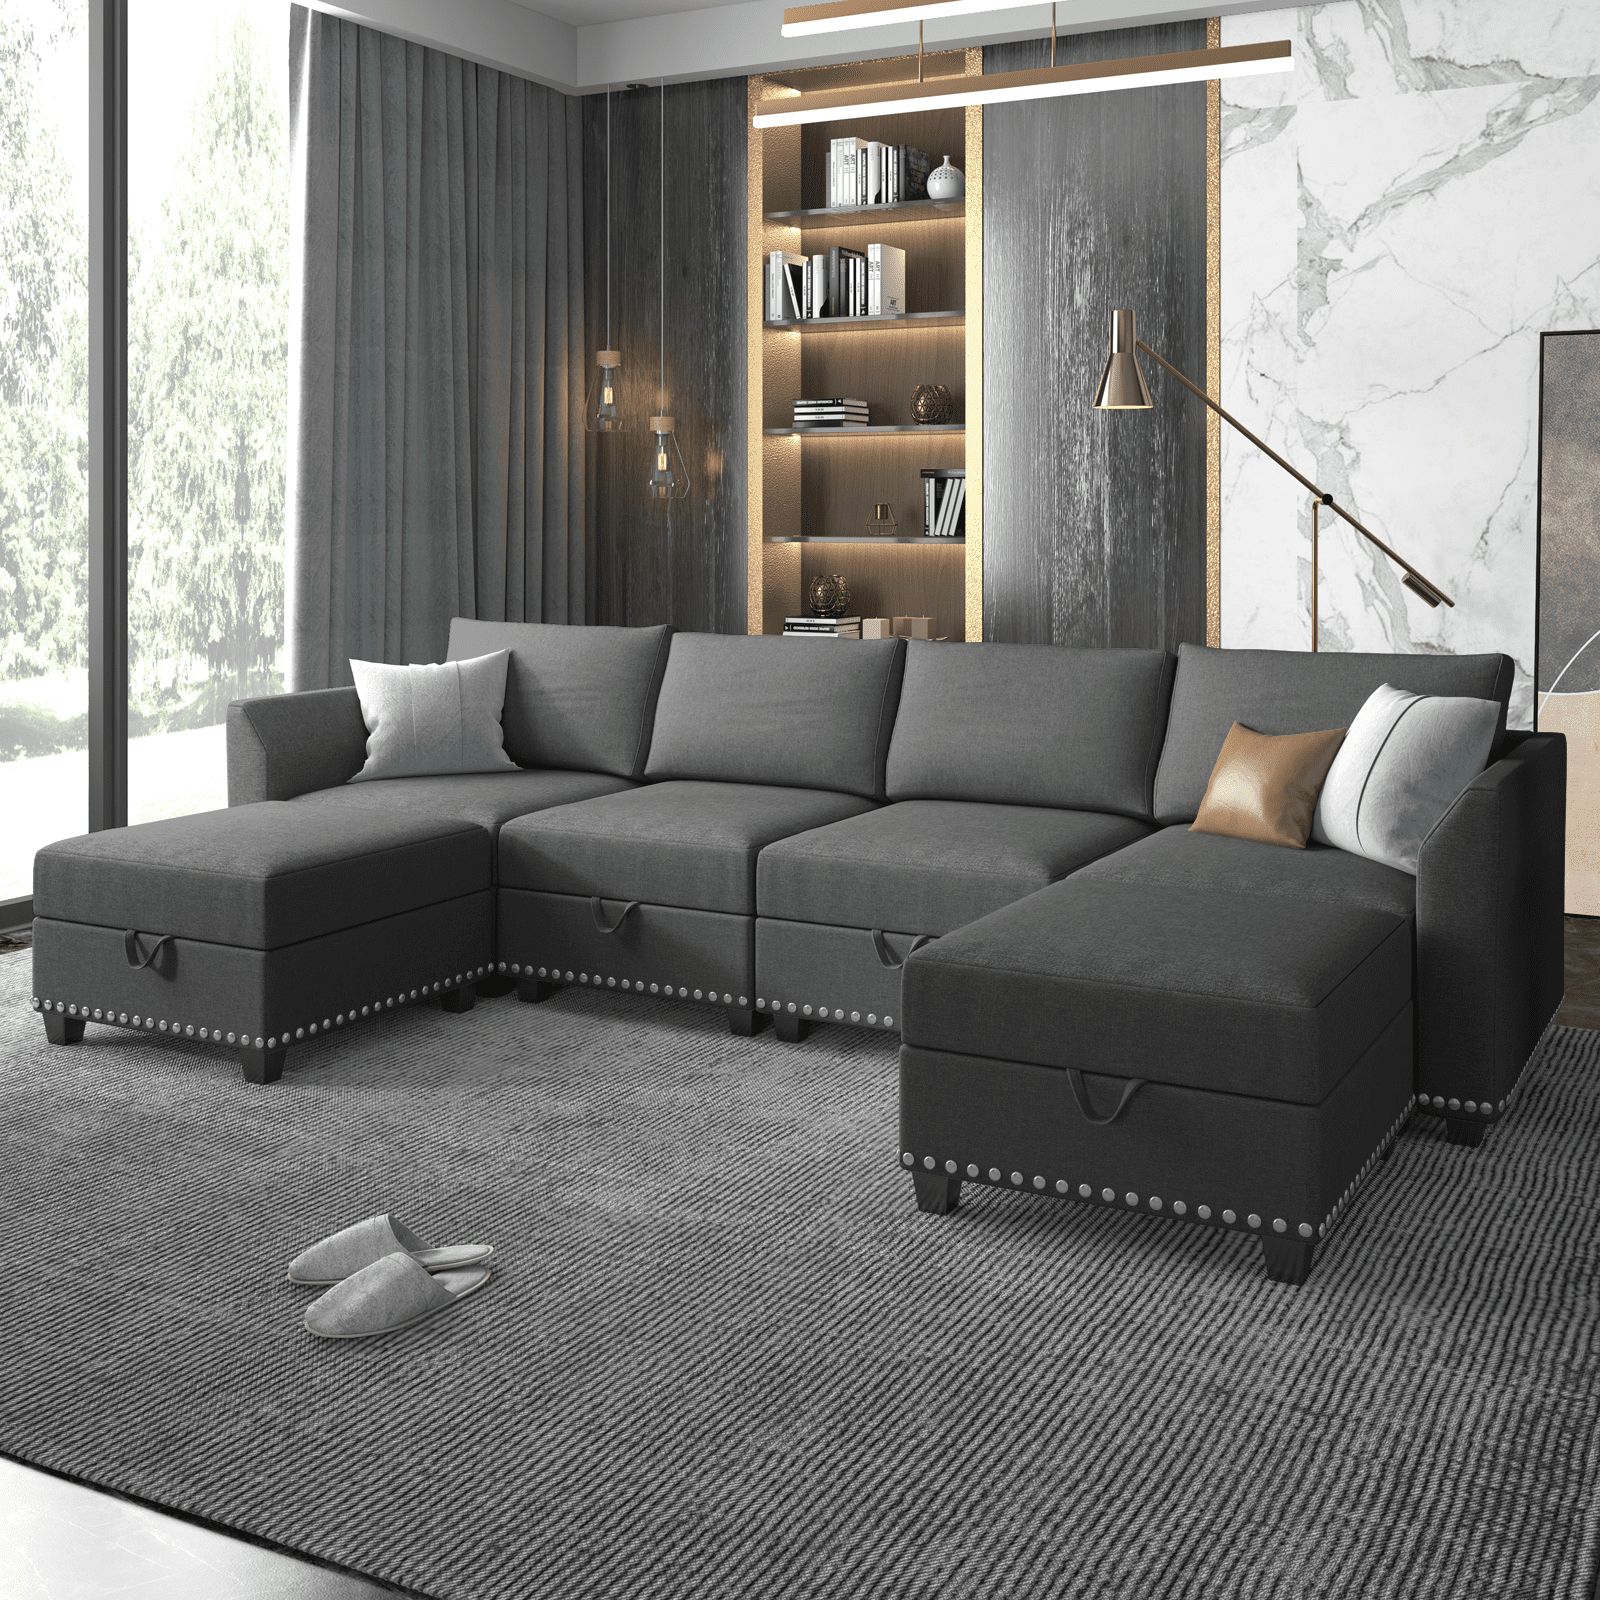 Mjkone U Shaped Sectional Sofa With Storage, 6 Seater Modular Sectional Sofa  With Nailhead Trim, Oversized Sleeper Sofa Couch Bed, Convertible Couches  For Living Room,free Combination (dark Grey） – Walmart Within 6 Seater Modular Sectional Sofas (View 5 of 20)